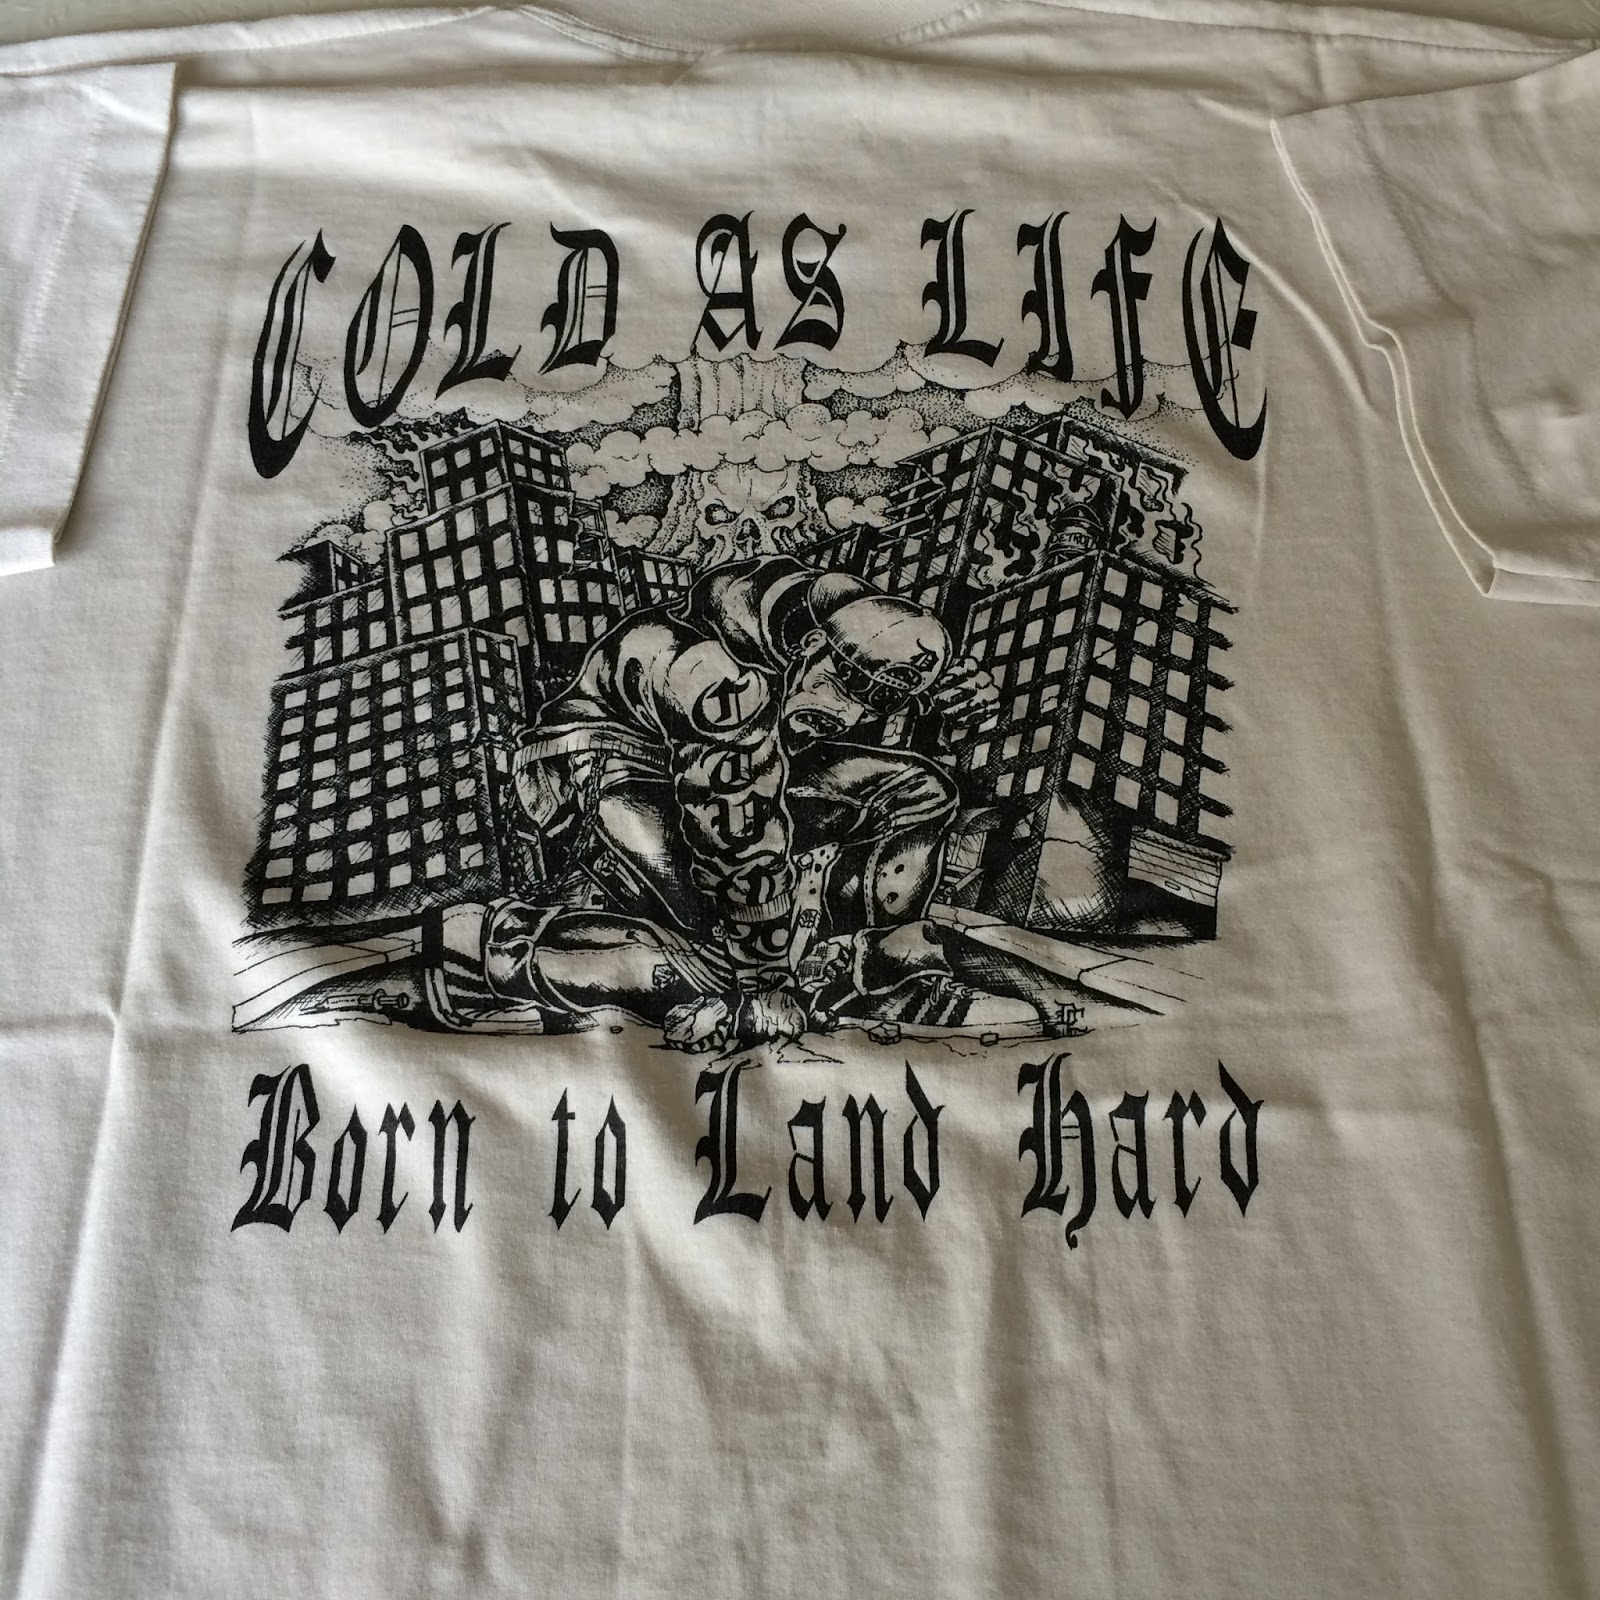 Cold As Life-Born To Land Hard.zip